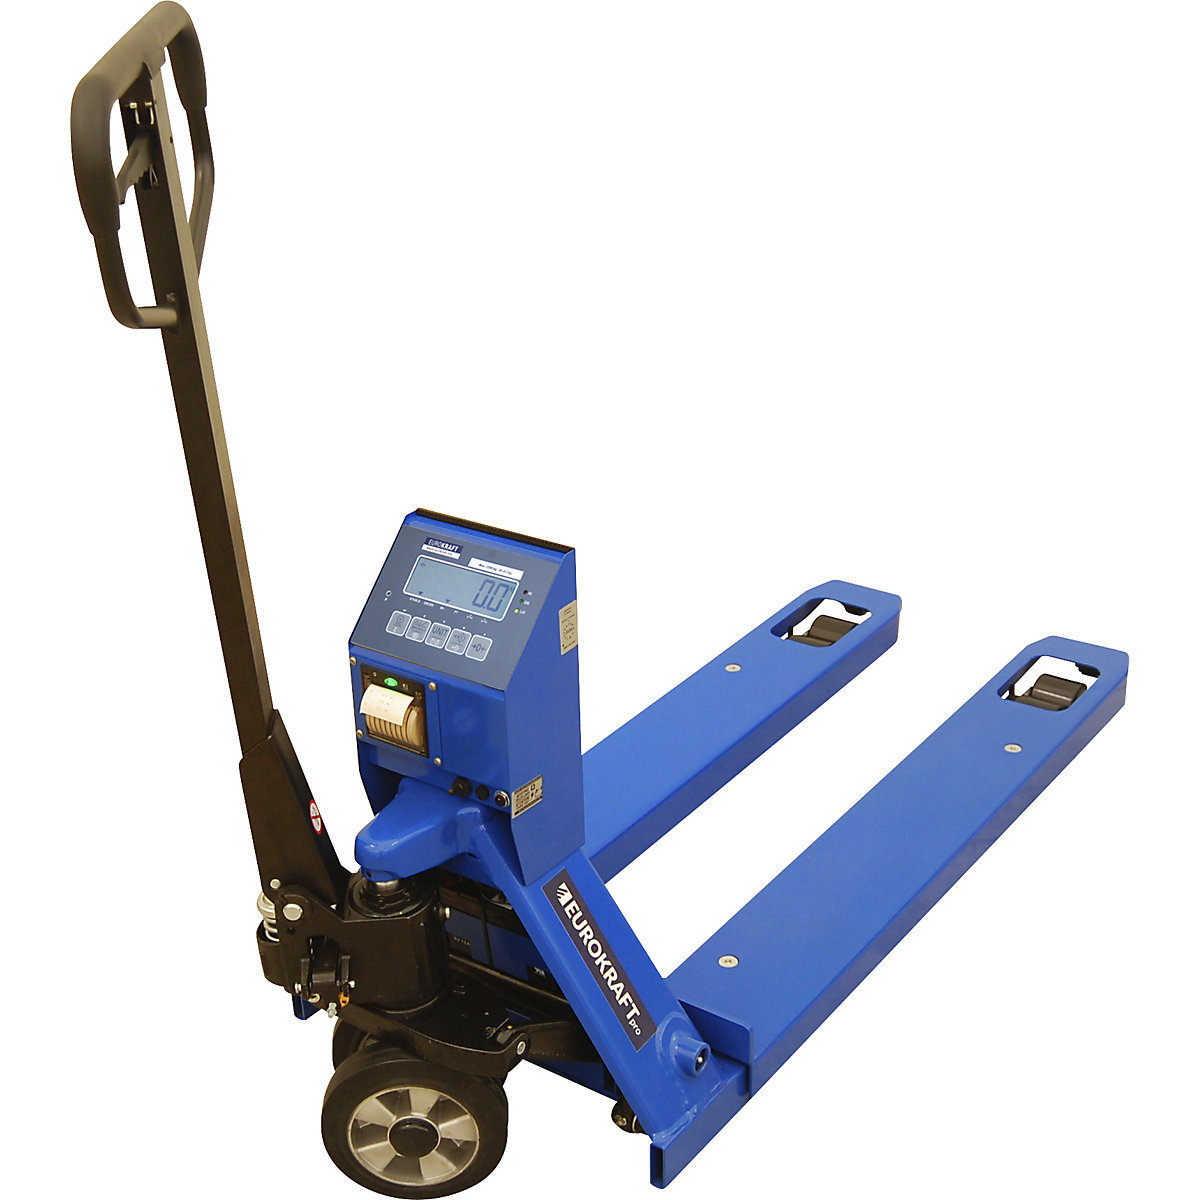 Pallet truck with weighing scale – eurokraft pro